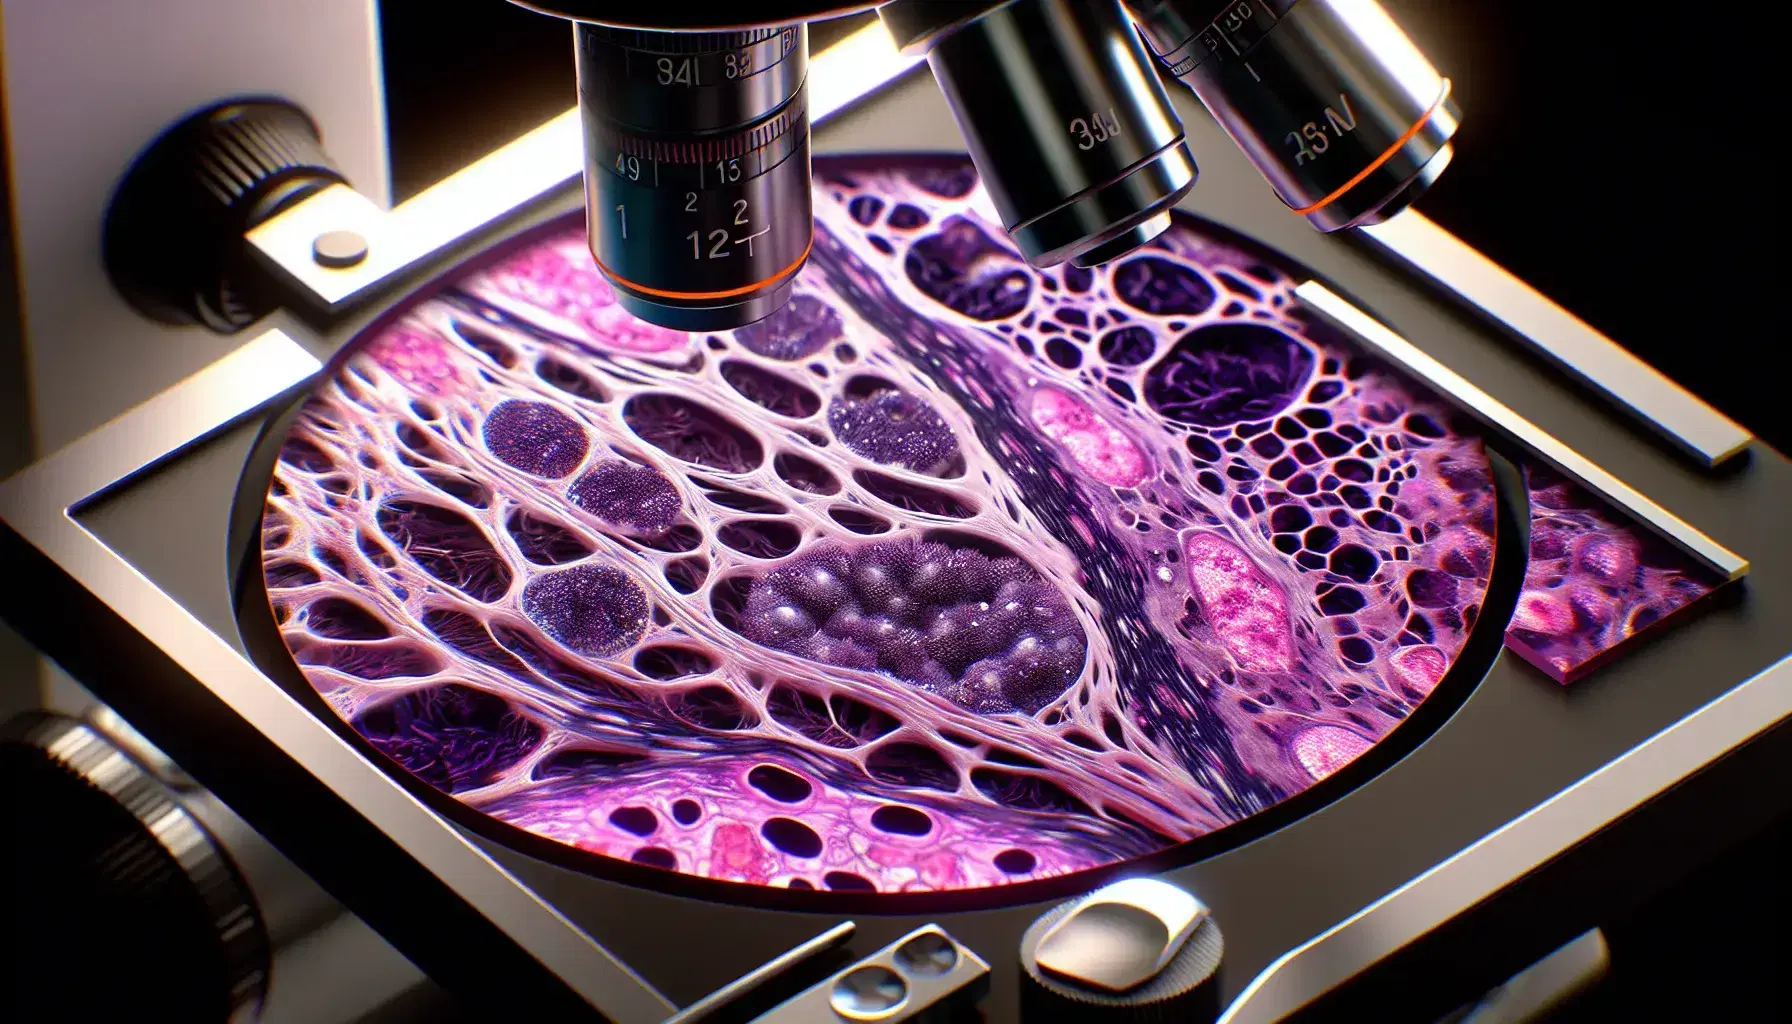 Microscopic slide with colored tissue in cell cycle phases, nuclei highlighted in purple on a blurred background, metallic details of the microscope.